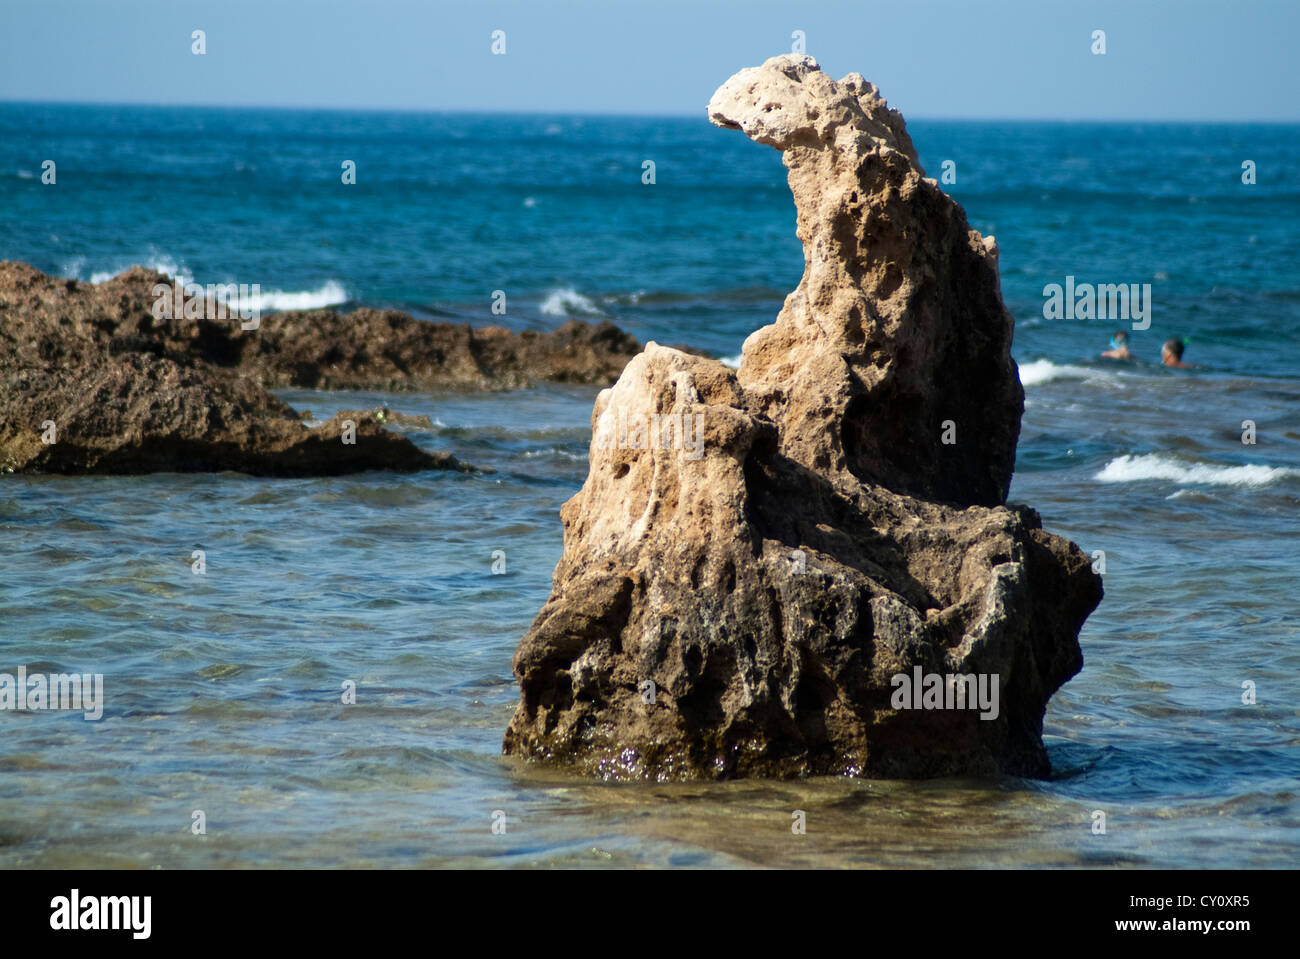 Natural sculpture on the rocky beach at Les Rotes, Denia, Cape San Antonio, province of Alicante, Spain, Europe Stock Photo